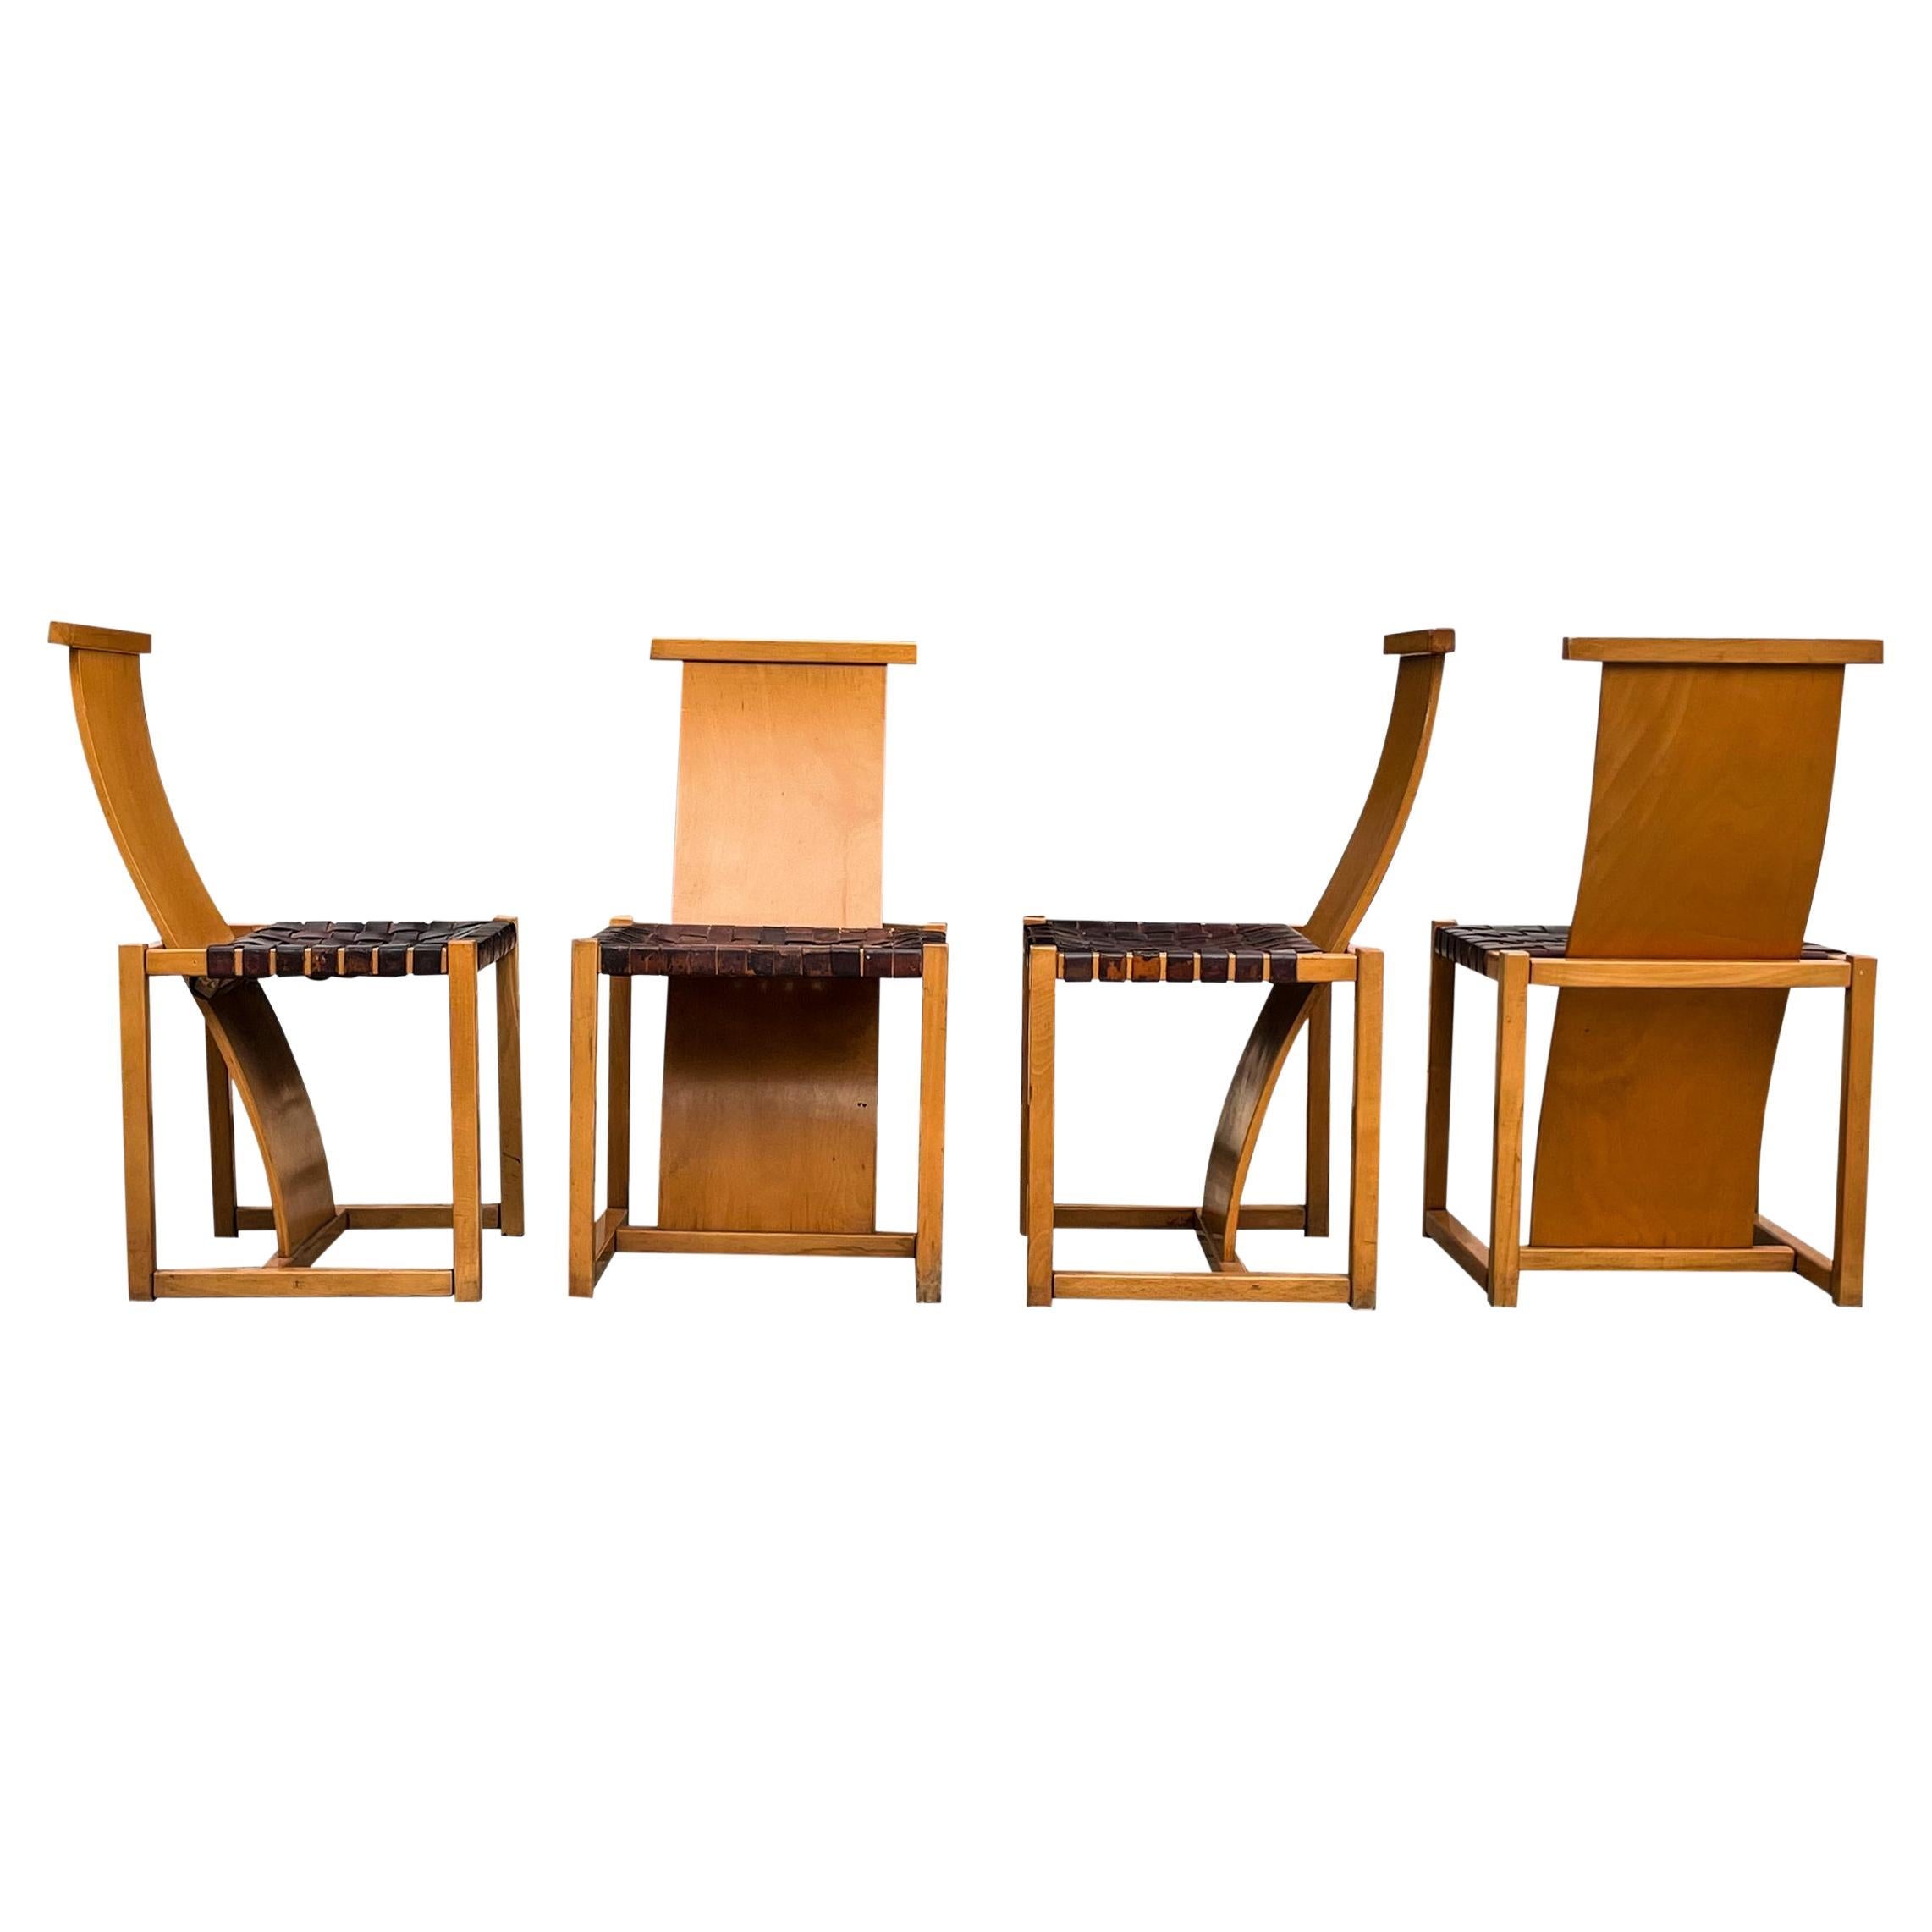 Midcentury Modern Italian Design Beech & Leather Dining Chairs, 1970s, Set of 4 For Sale